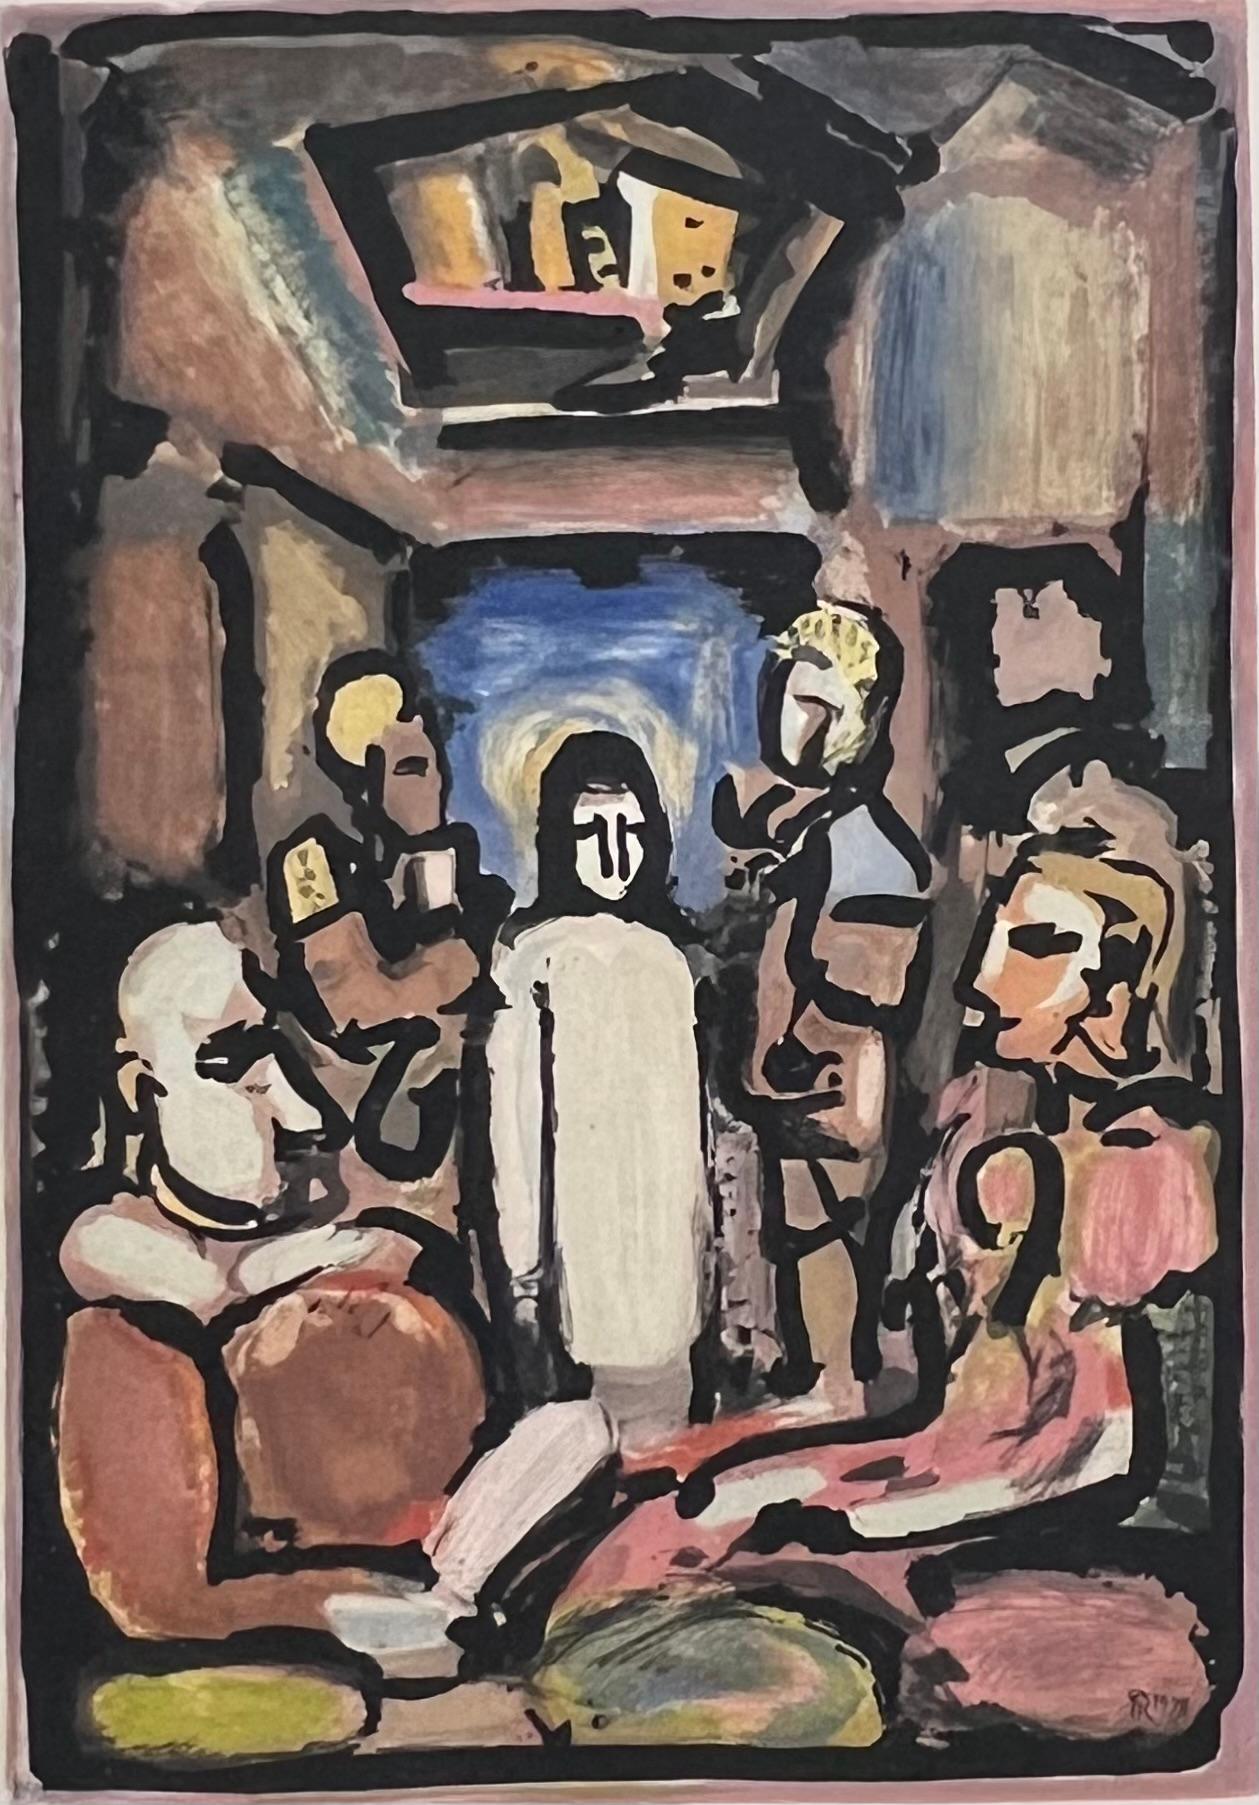 George Rouault, Christ et Mammon from The Passion, etching, hand coloring  - Print by Georges Rouault